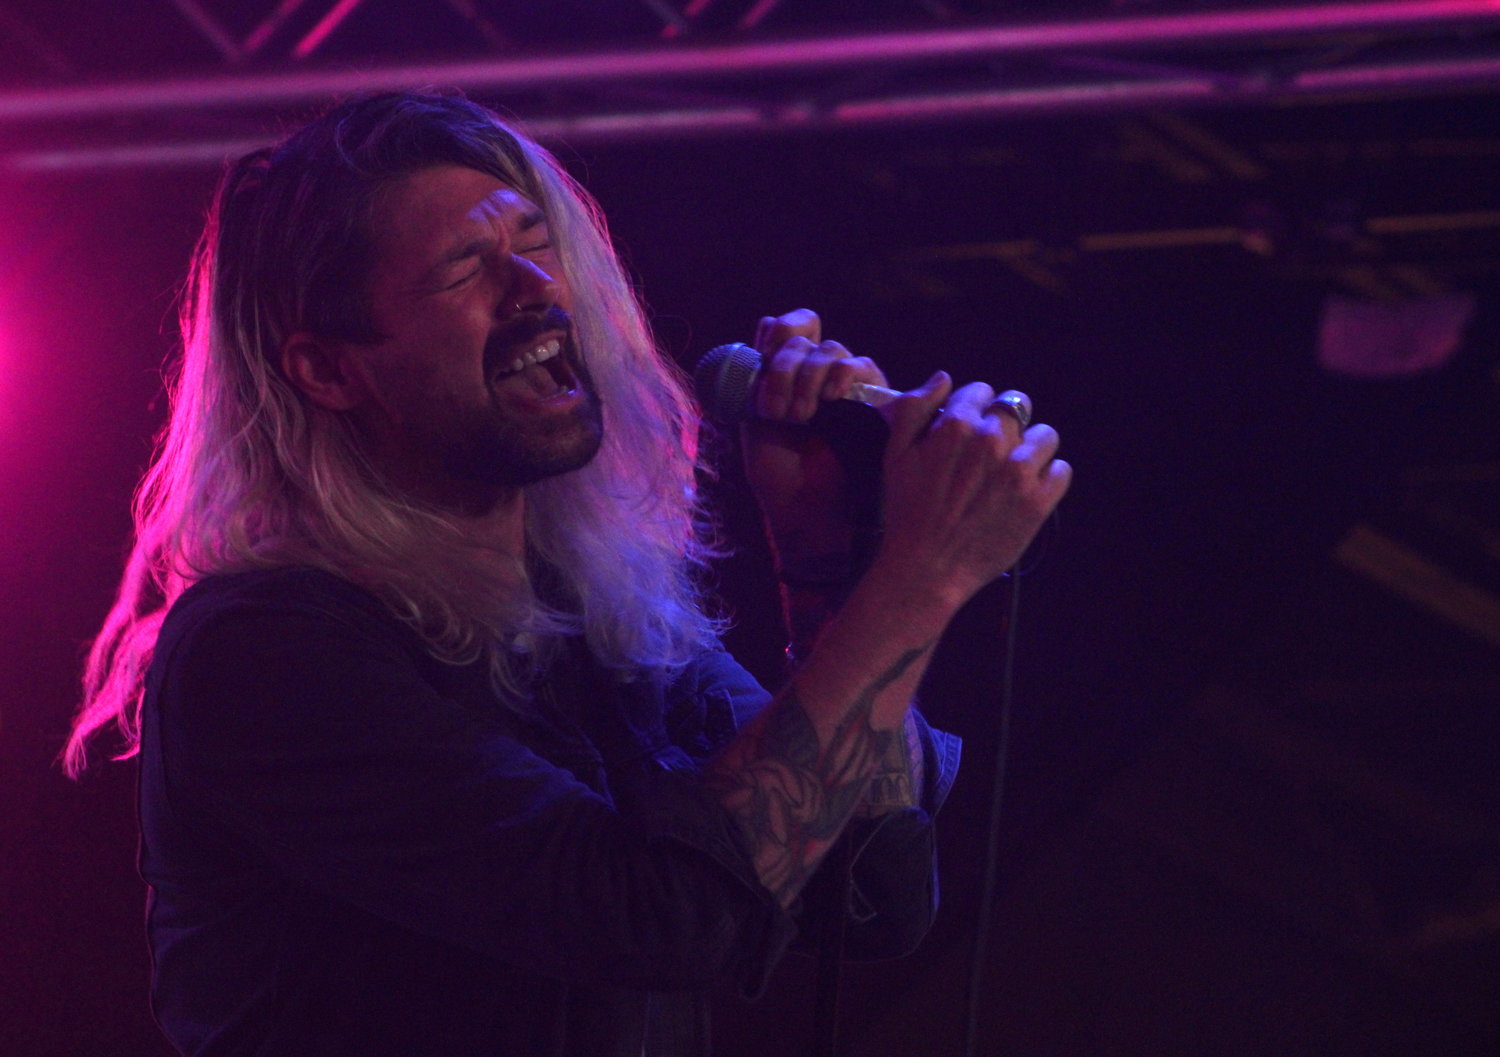 Taking Back Sunday vocalist Adam Lazzara gave his all at a sold-out show at Mulcahy’s Pub and Concert Hall in Wantagh on Dec. 9